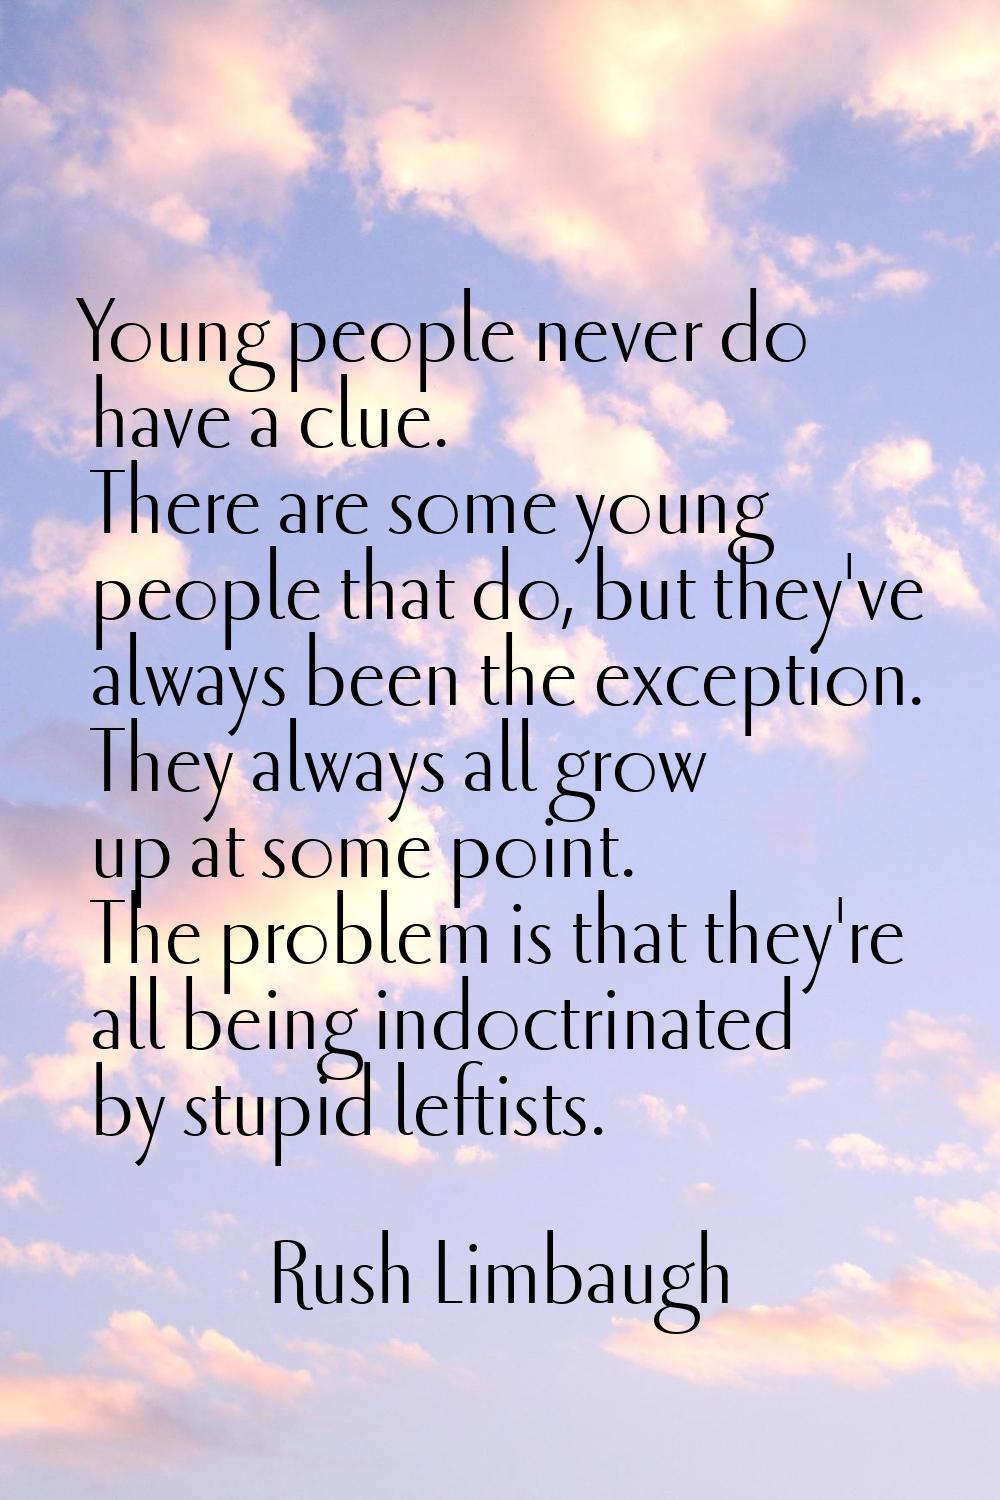 Young people never do have a clue. There are some young people that do, but they've always been the